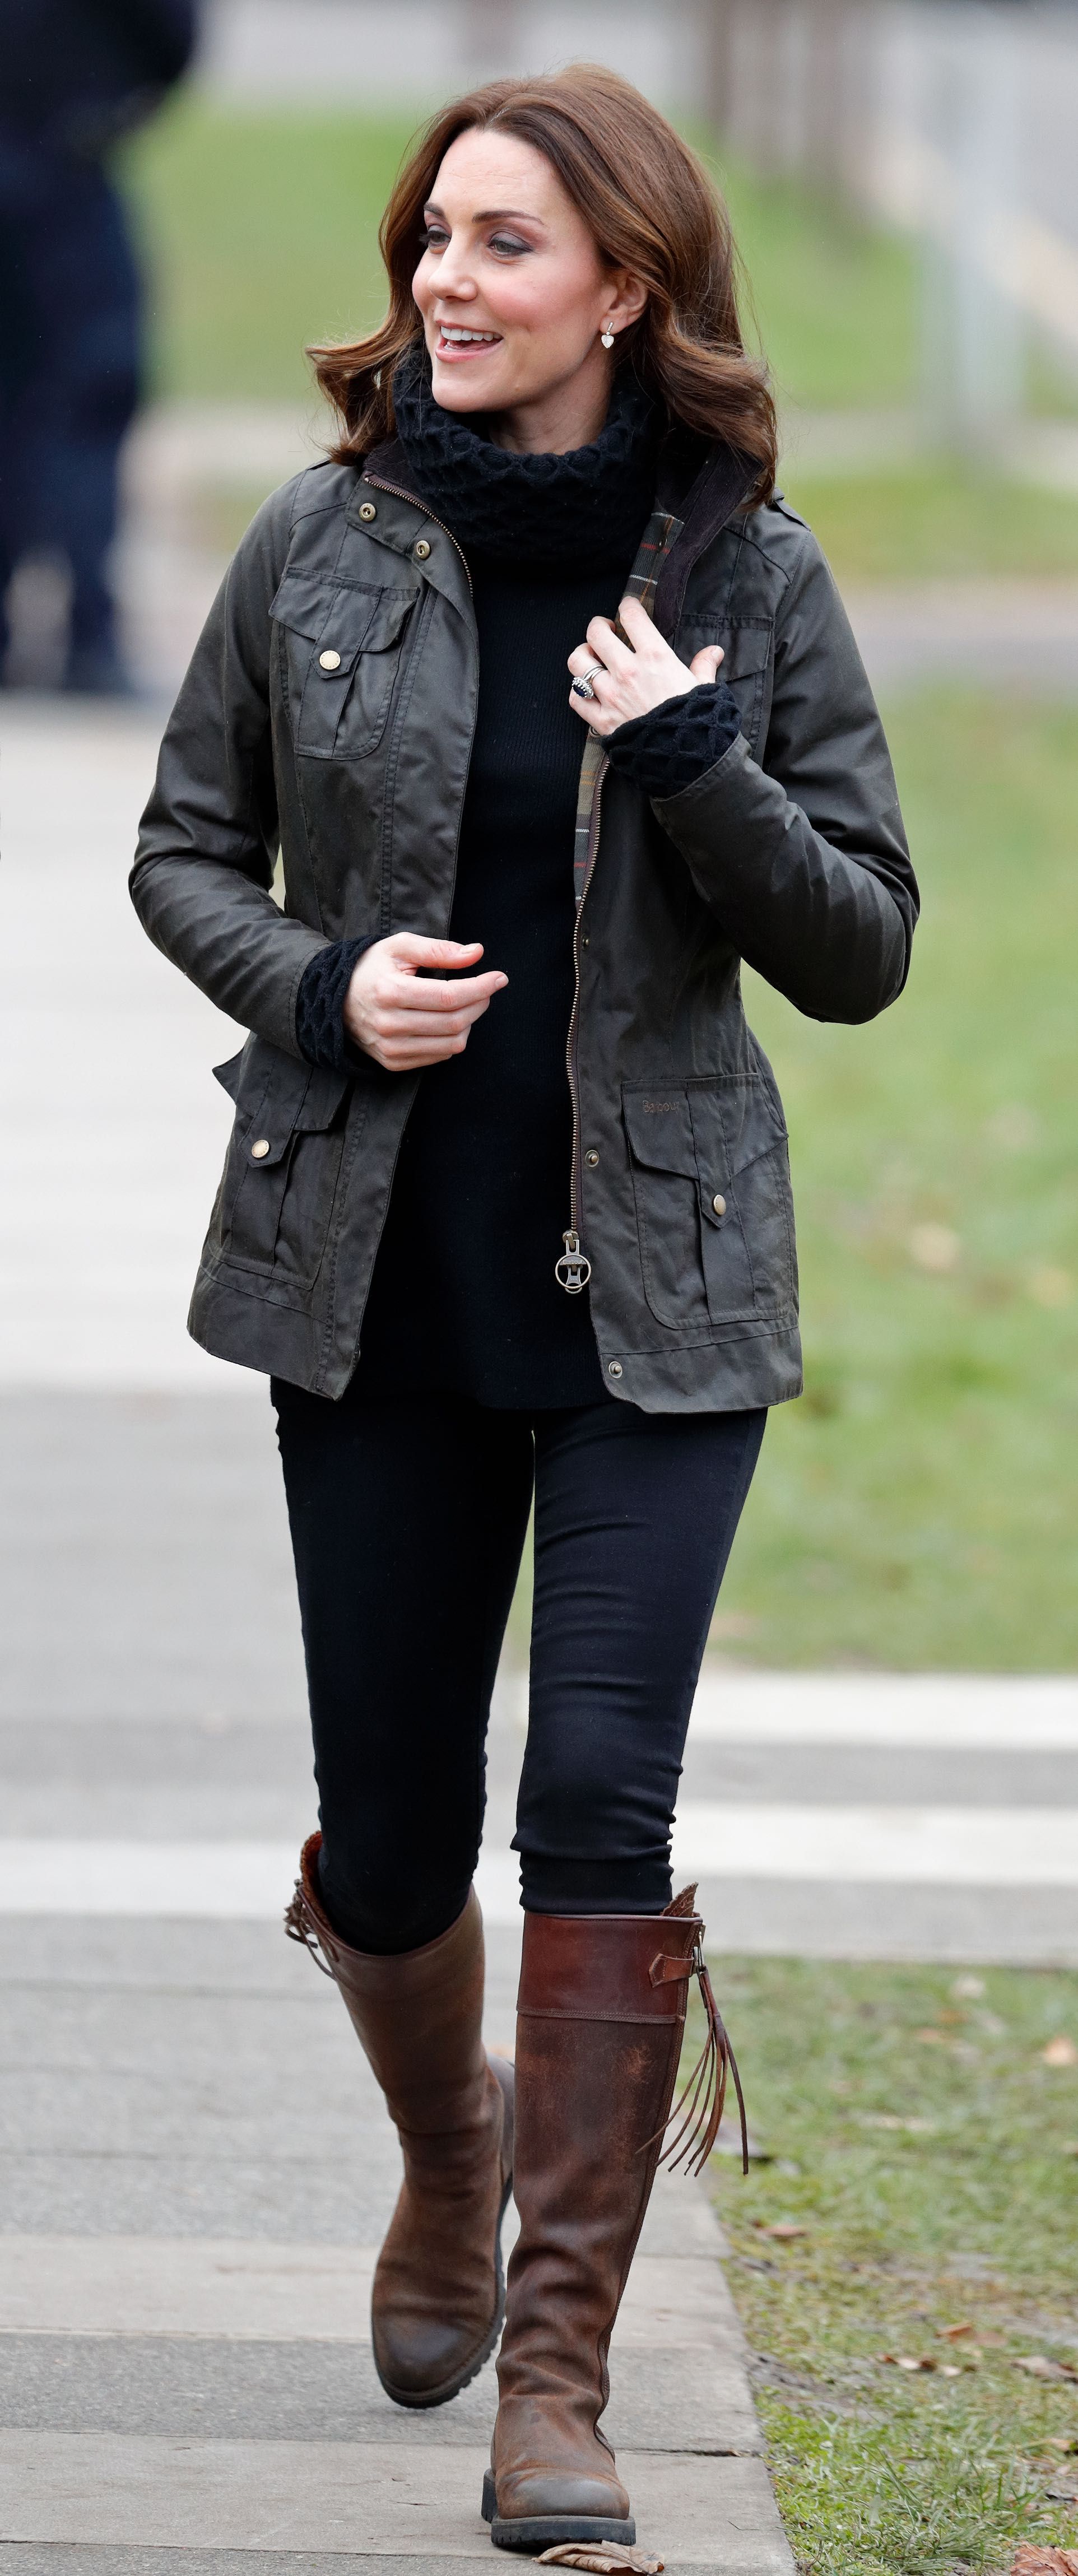 Kate Middleton Jeans and Pants Outfits 